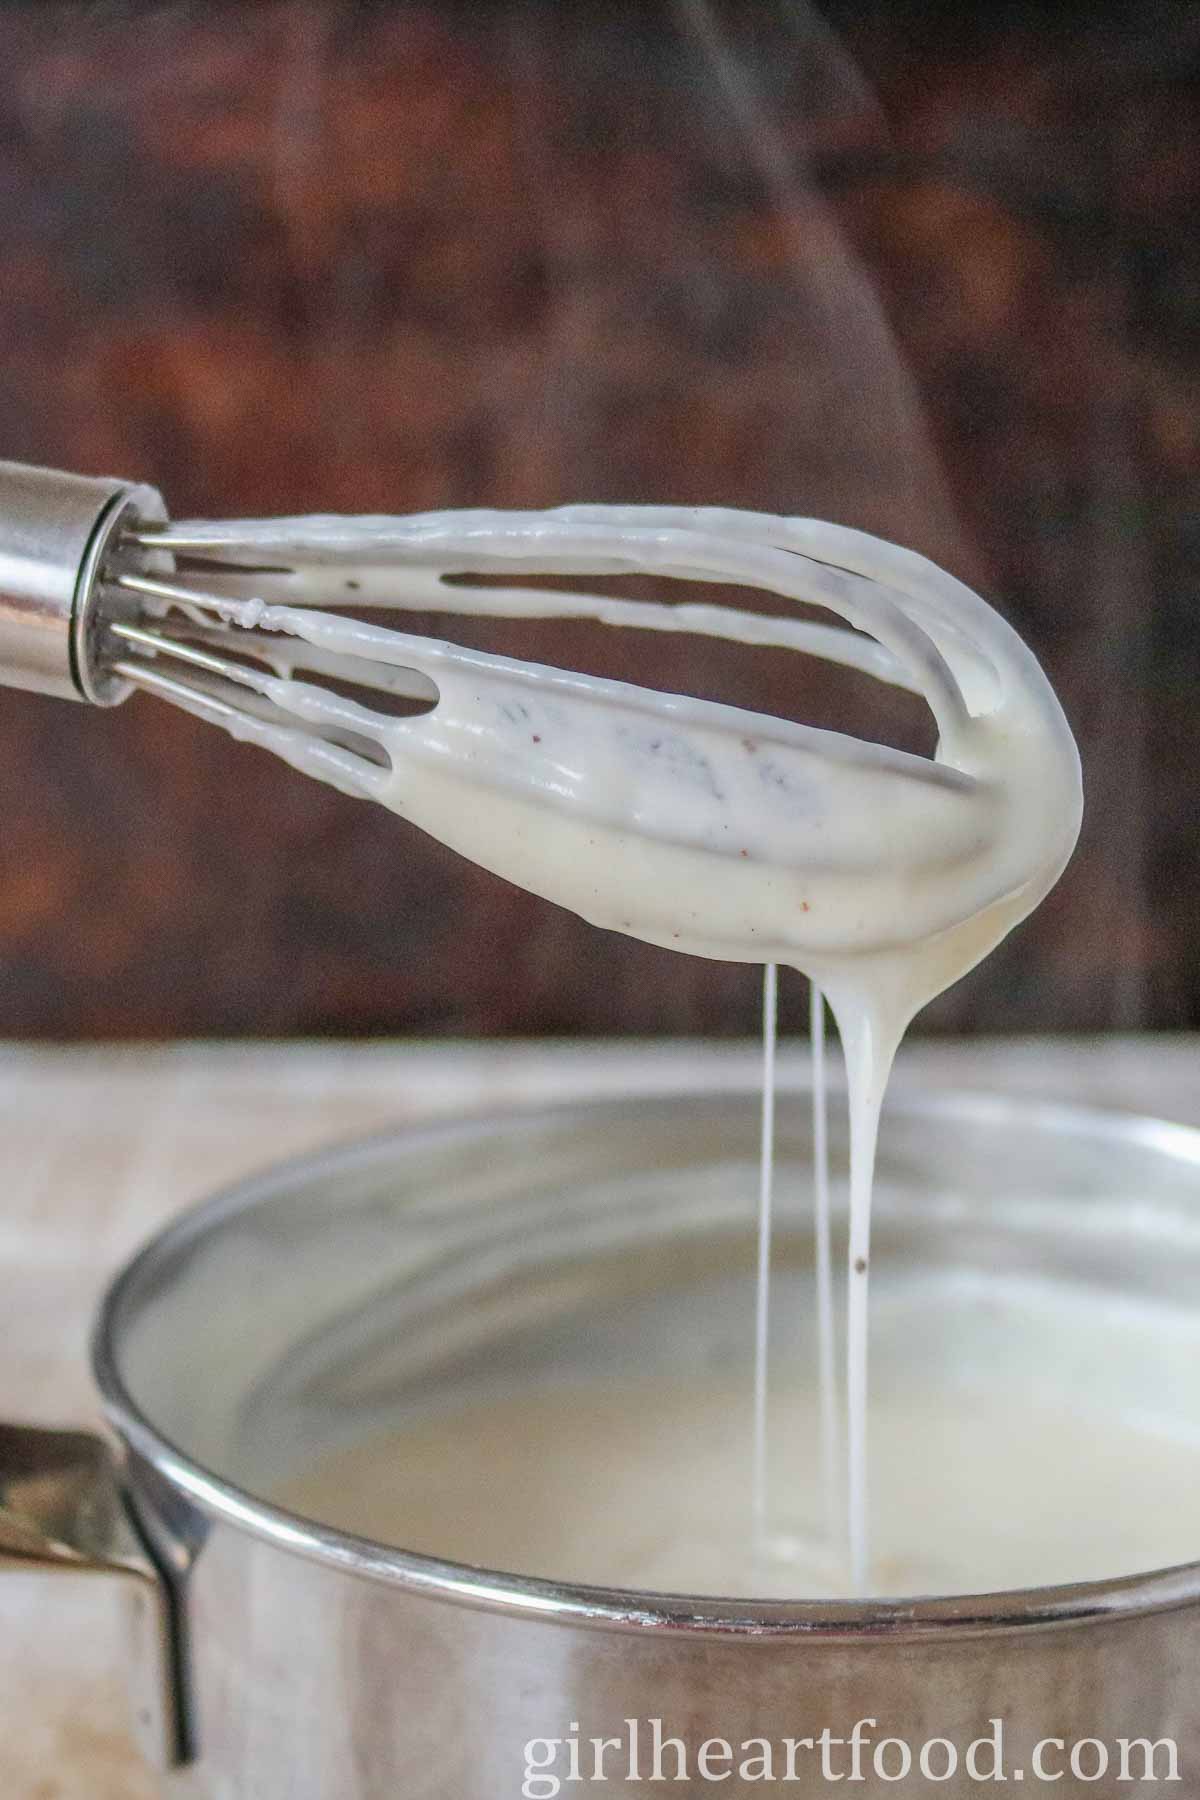 A whisk dripping with white sauce into a saucepan.